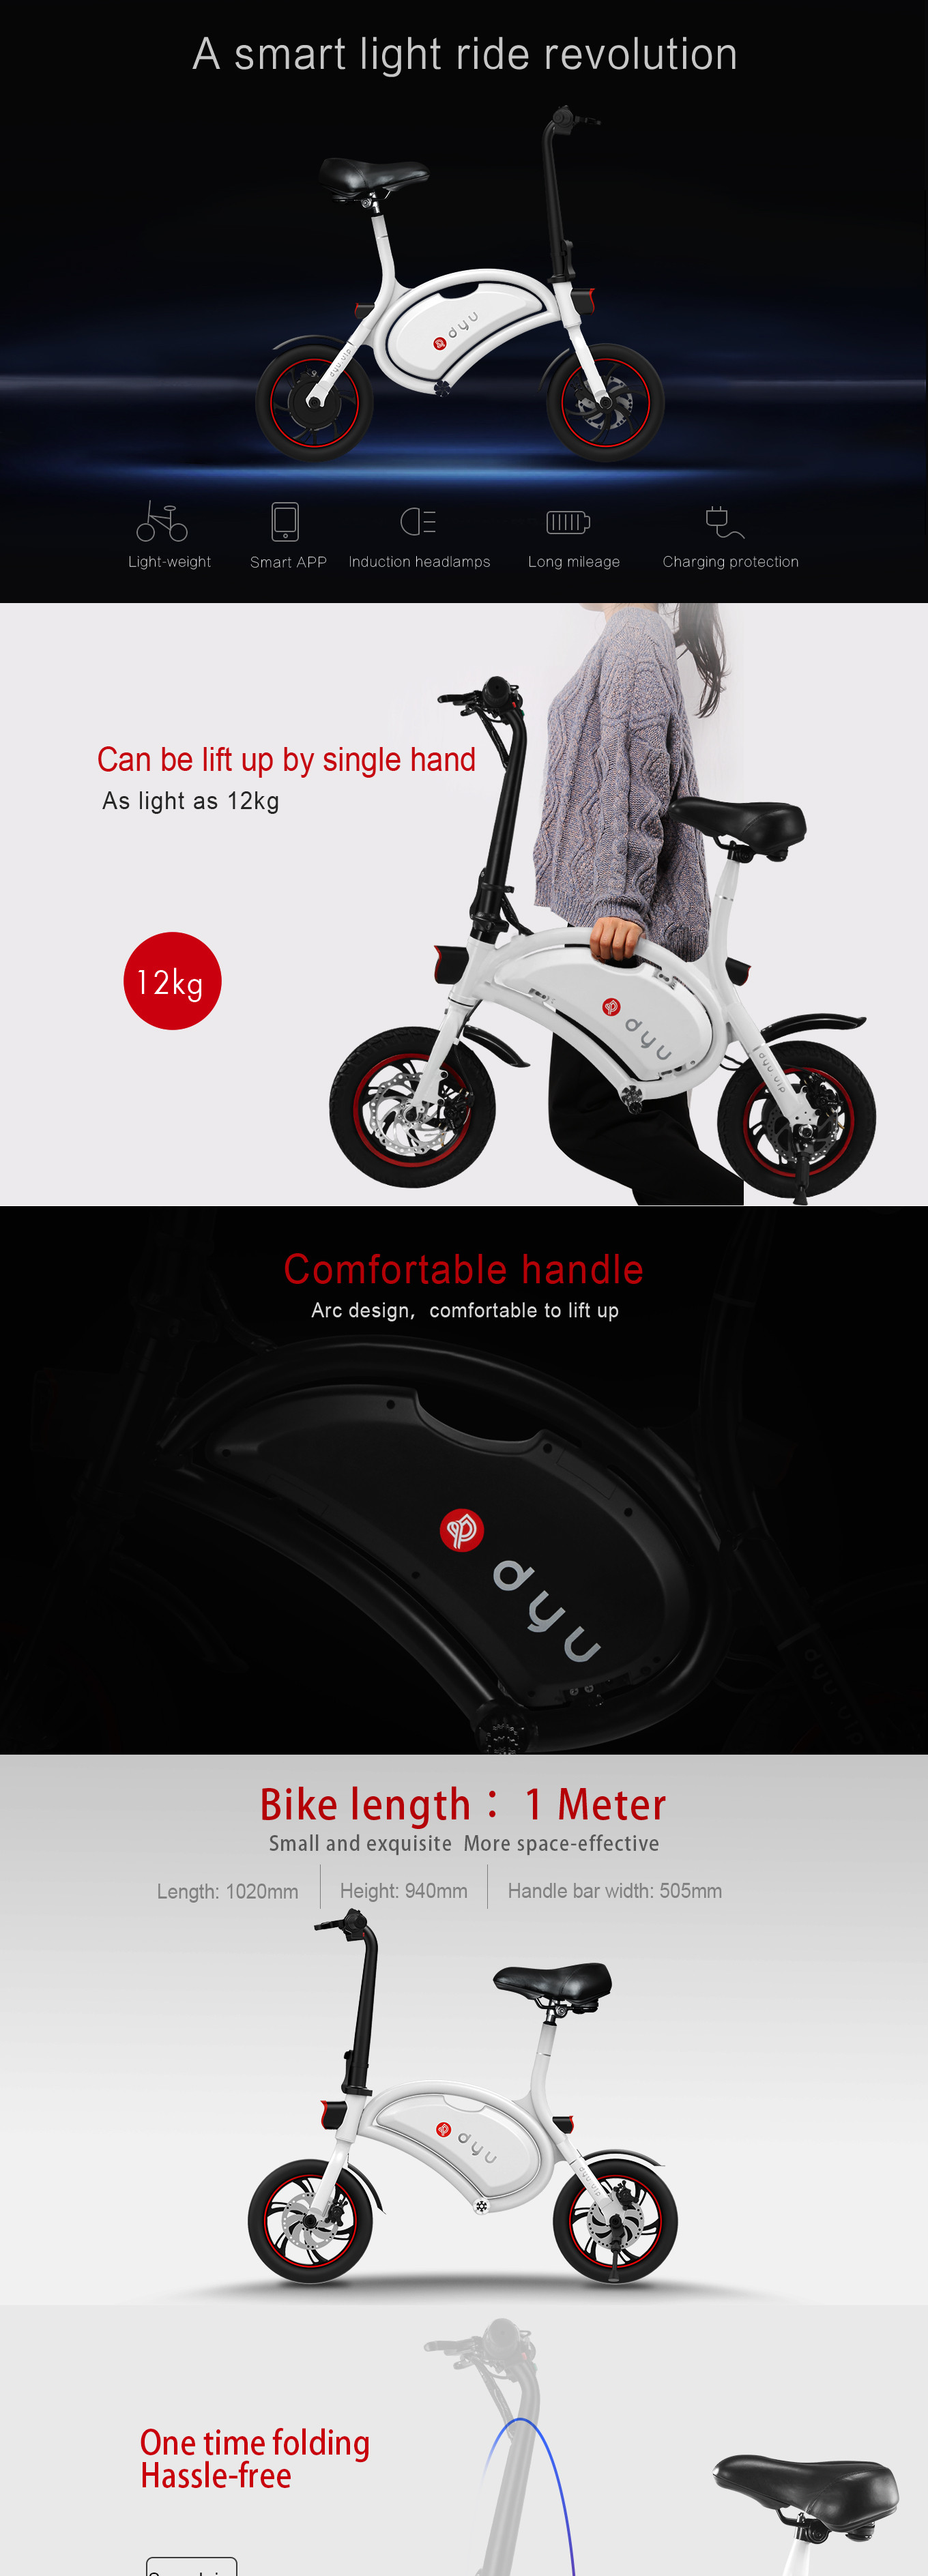 F-wheel Smart Location Electric Scooter Motorcycle 12inch Damping Tire 20KM/H